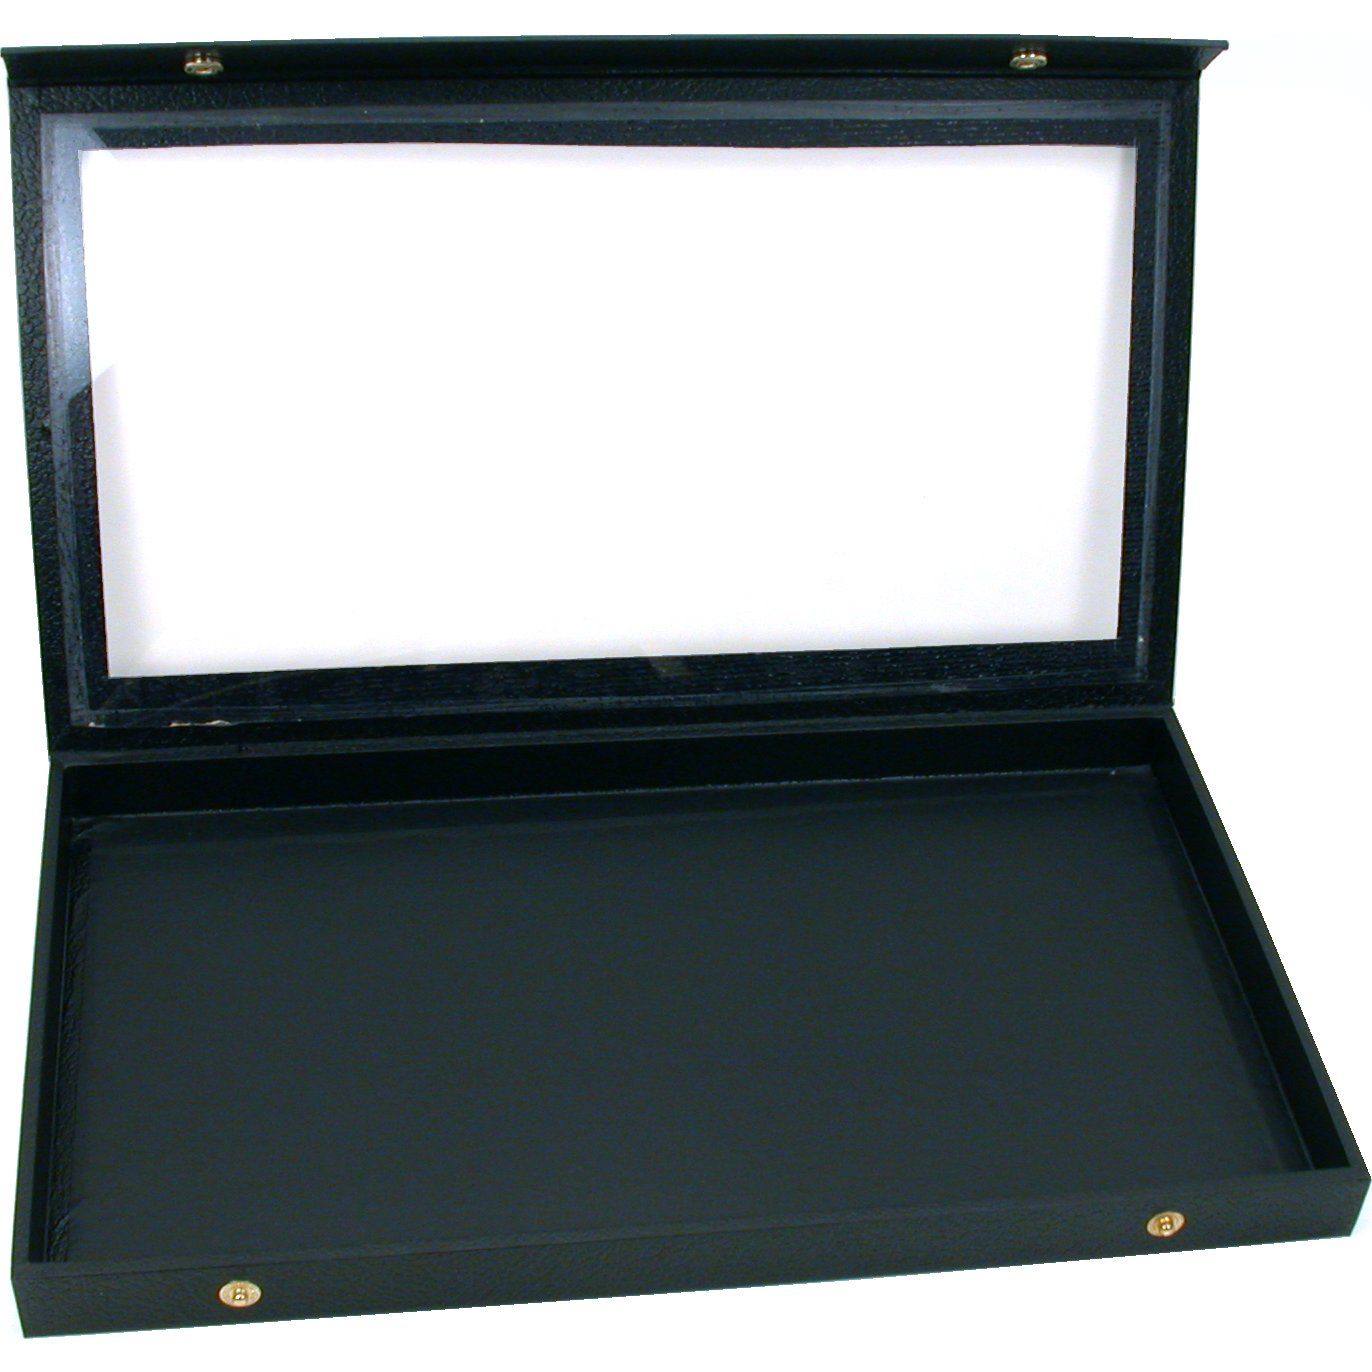 Glass Lid Faux Leather Jewelry Display Cases W/ 32 Slot Flocked Insert Kit 3 Pcs